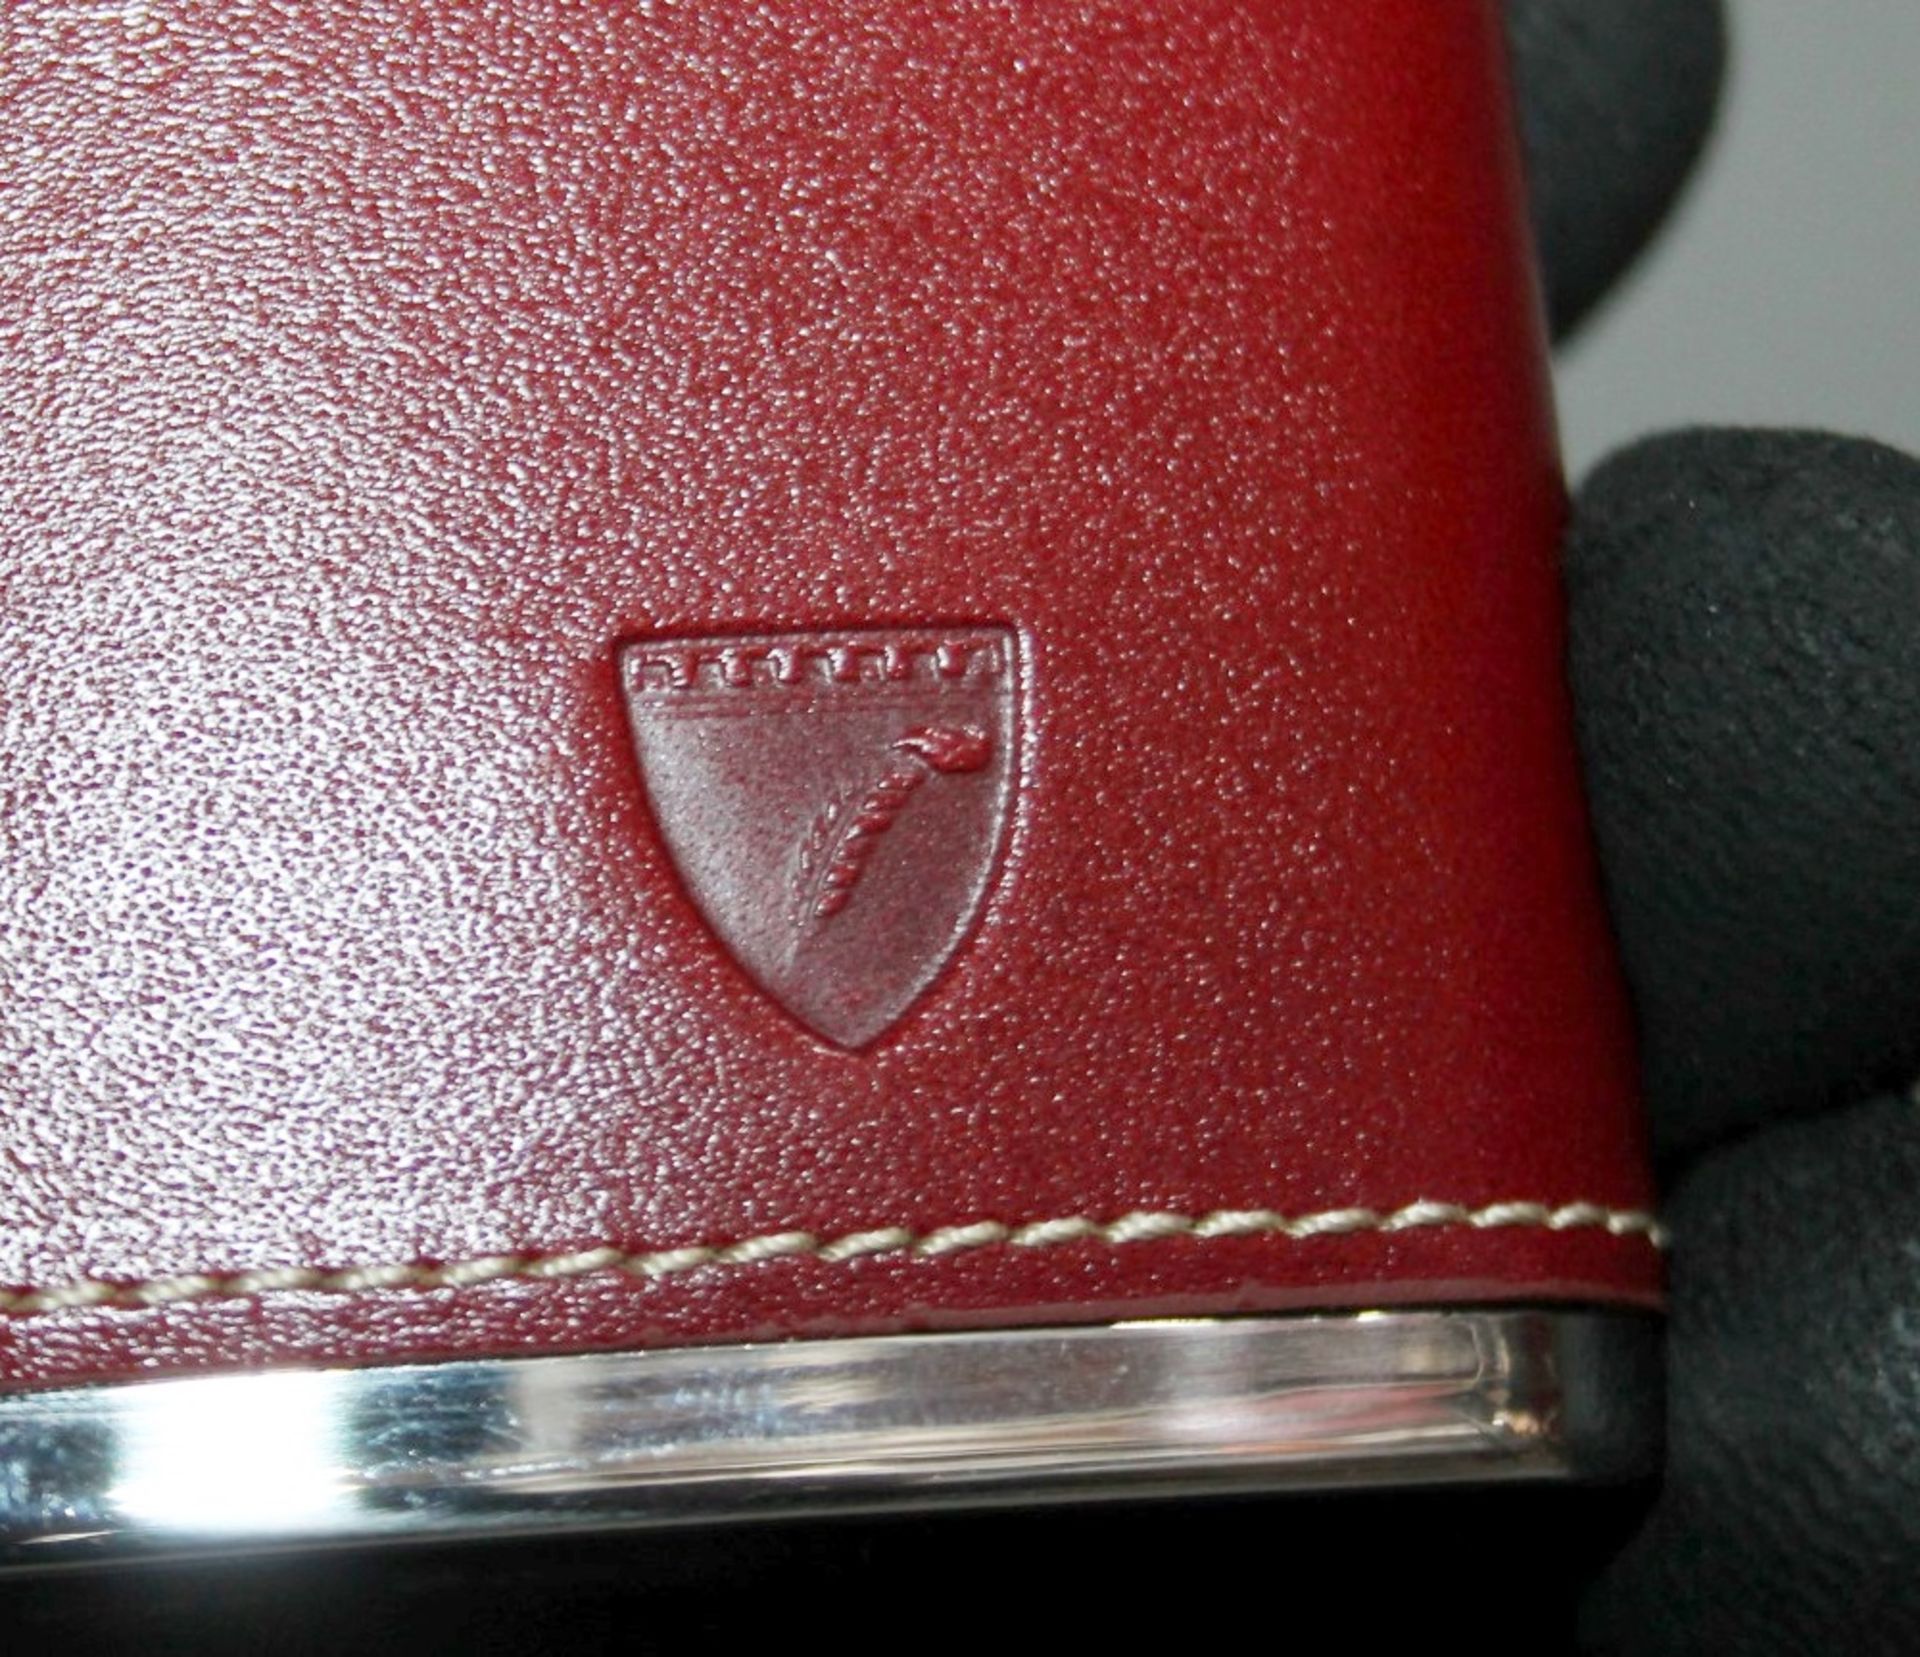 1 x ASPINAL OF LONDON Classic 5oz Fine Red Leather Hip Flask - Original Price £49.00 - Boxed Stock - Image 6 of 8